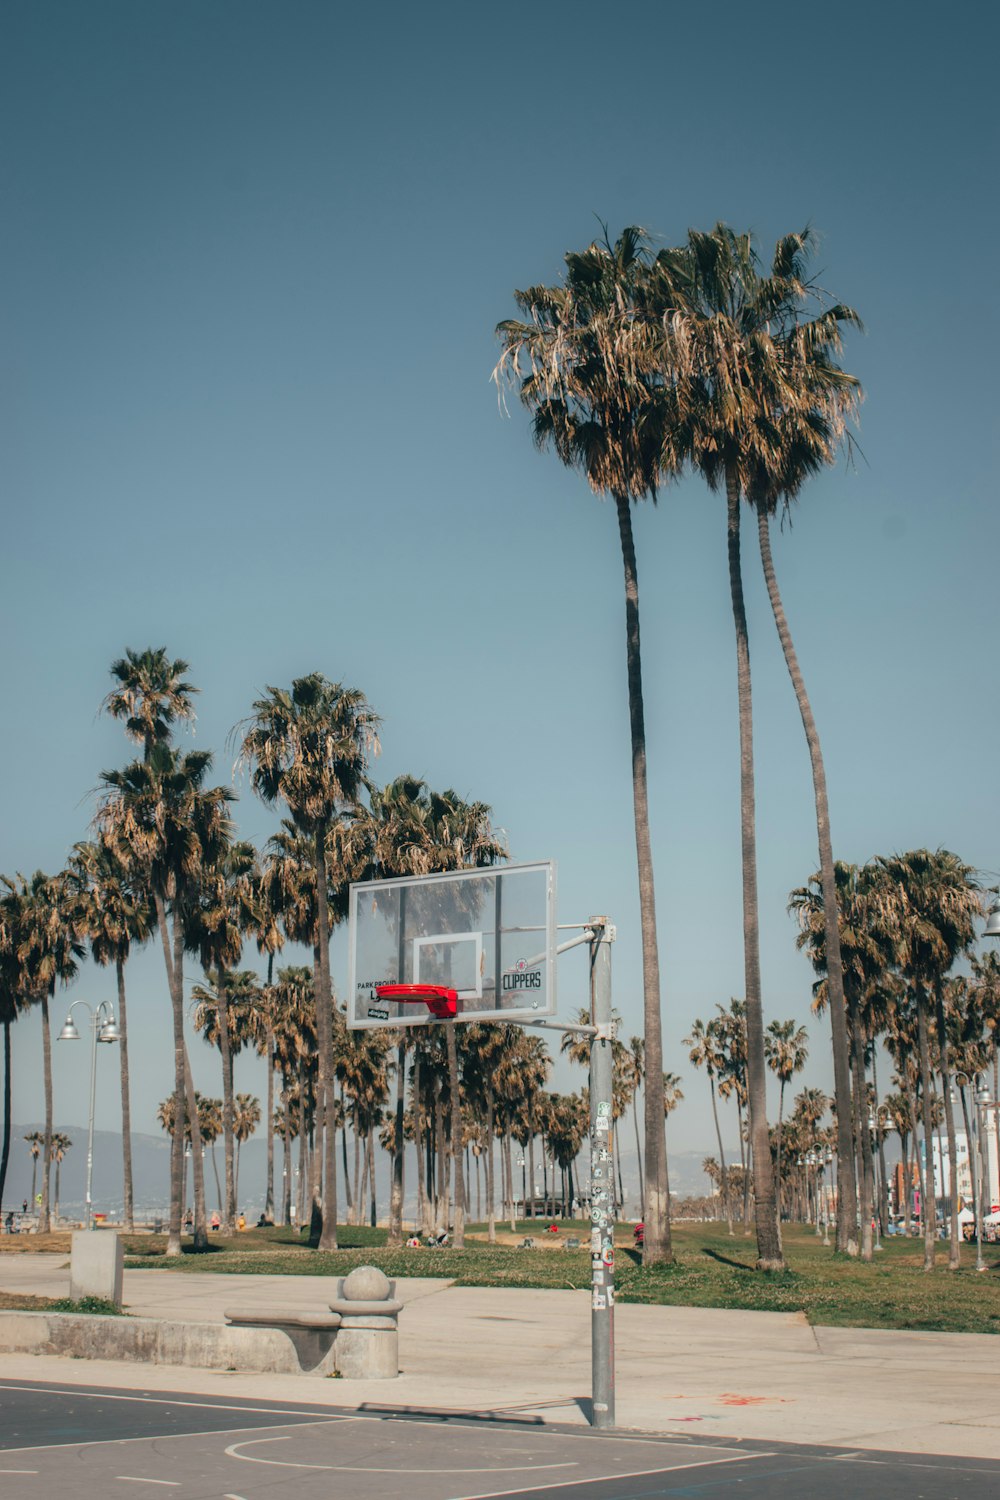 white and red basketball hoop near palm trees during daytime